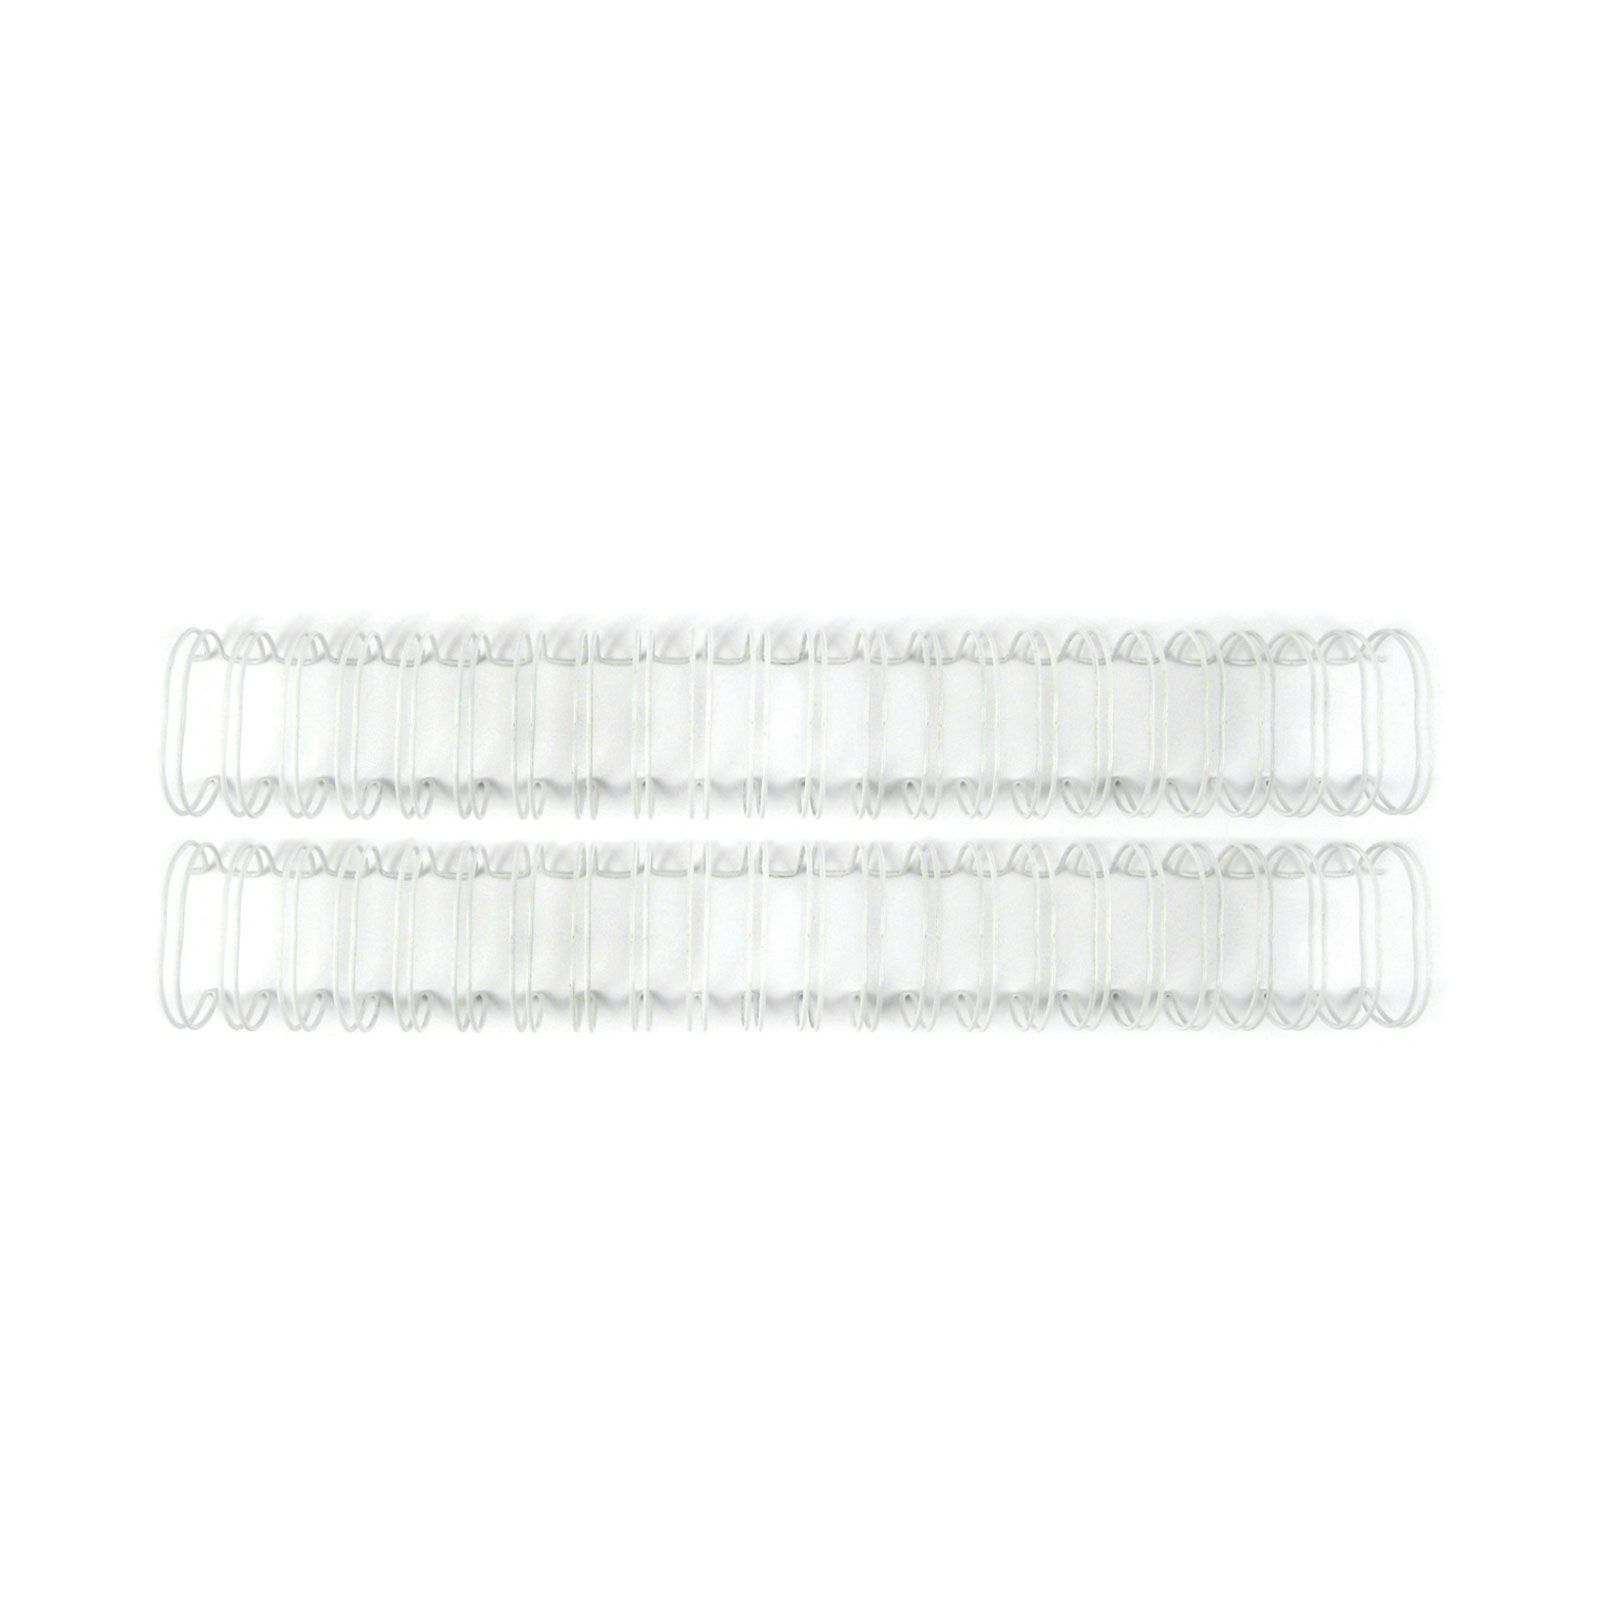 We R Makers • Cinch binding wires White 3,18cm 2pieces